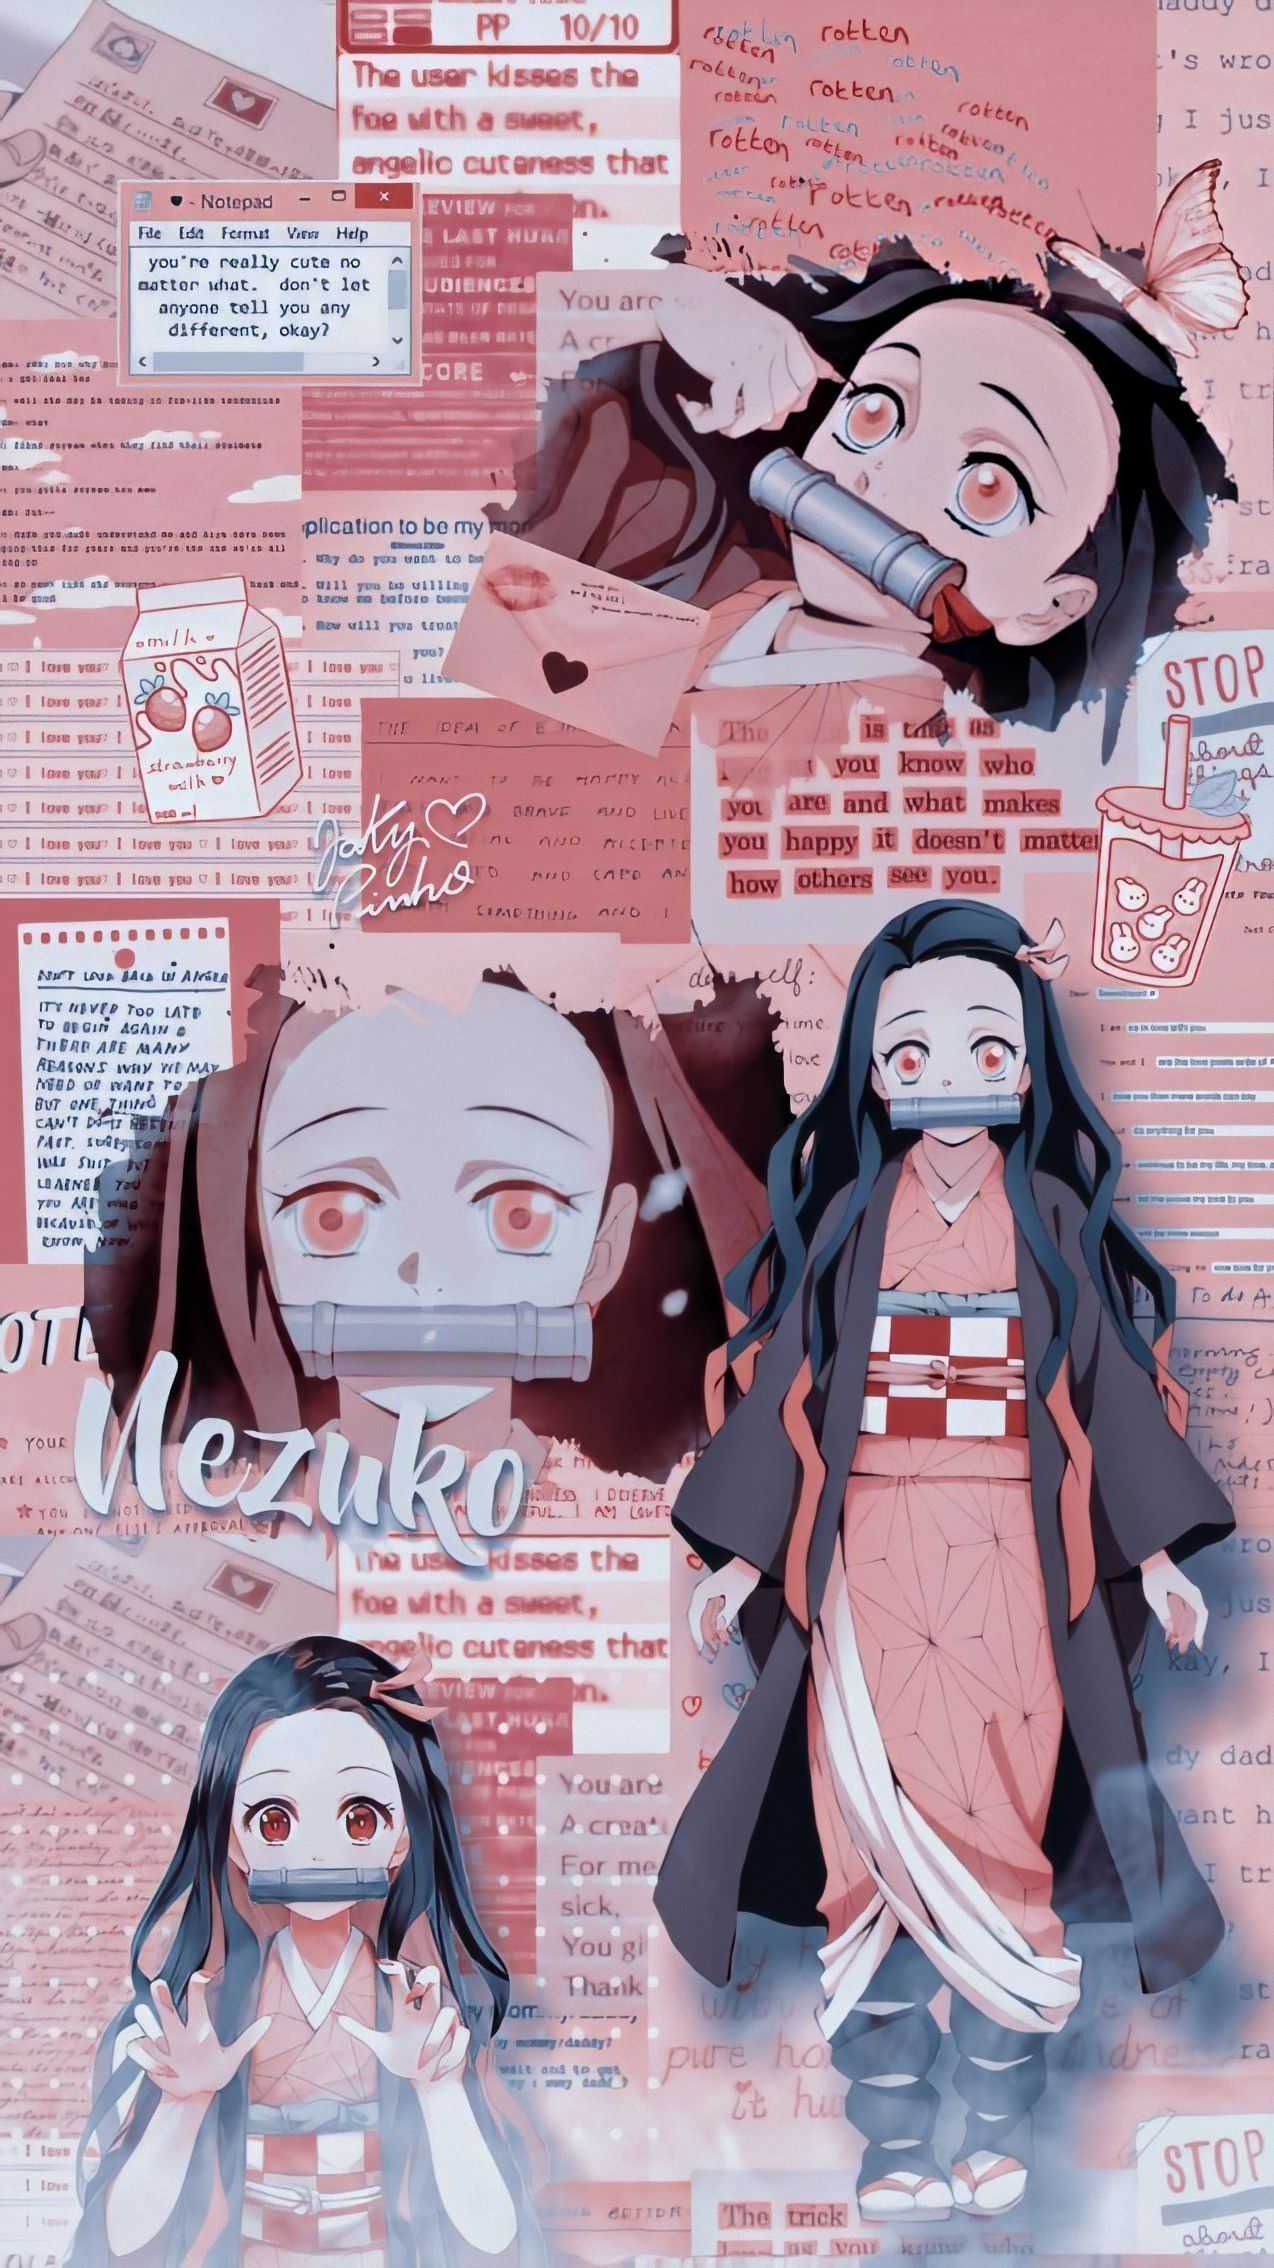 A collage of anime characters with different facial expressions - Nezuko